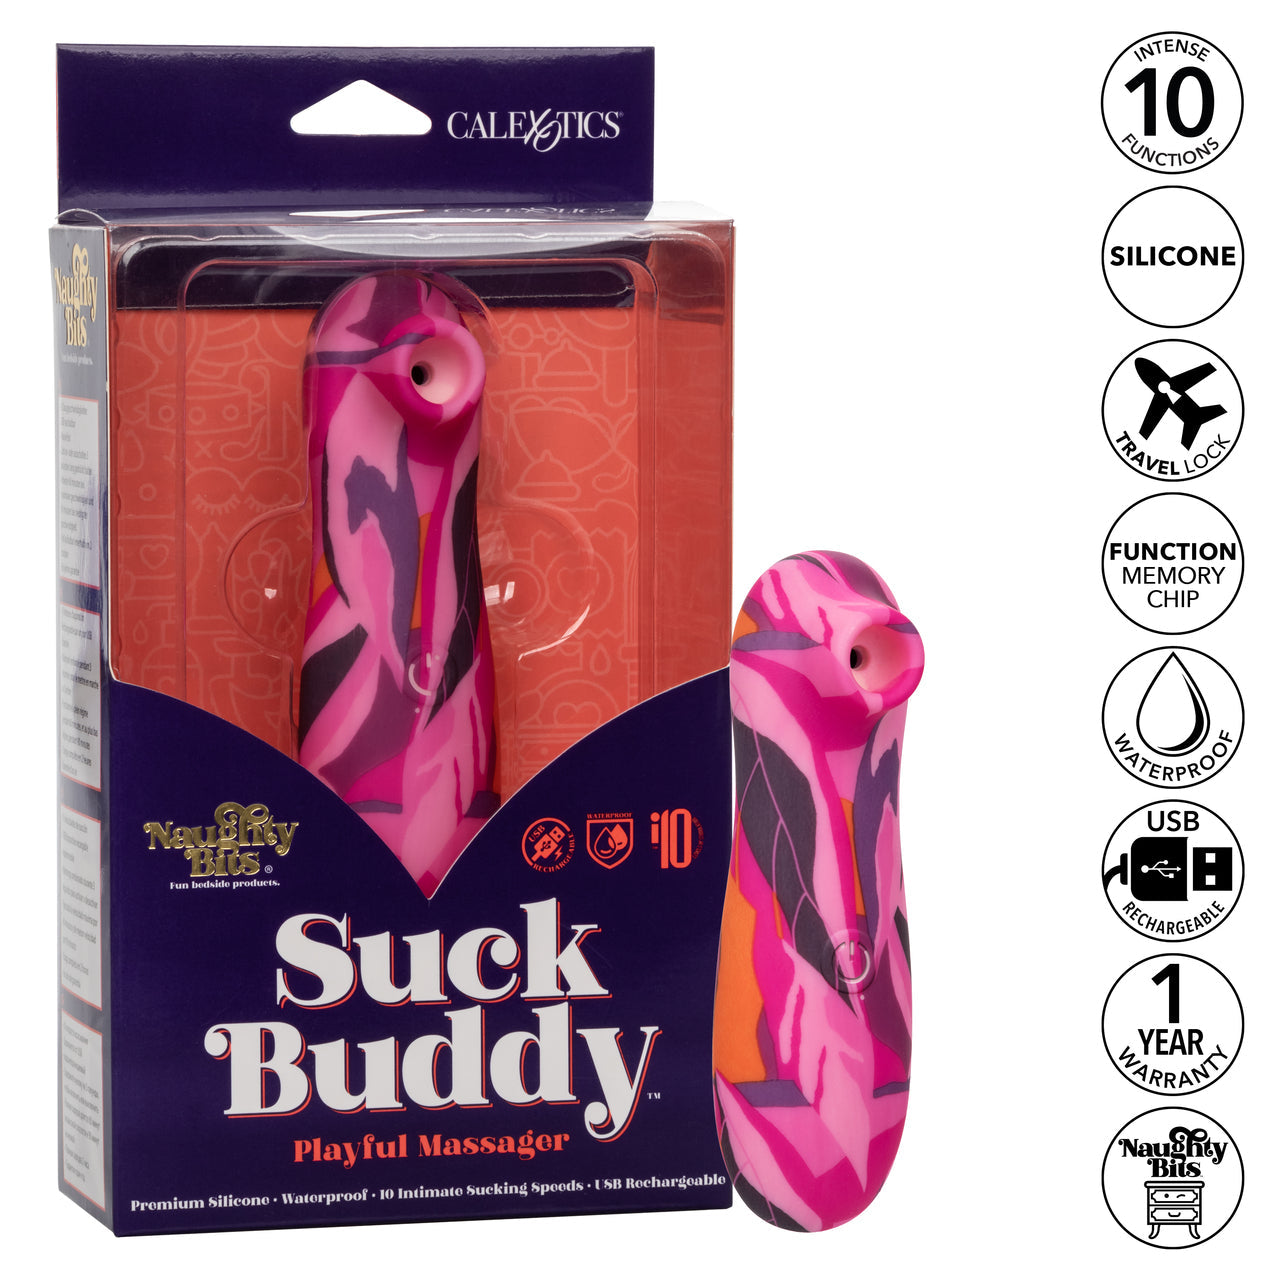 Naughty Bits Suck Buddy Playful Massager - Thorn & Feather Sex Toy Canada